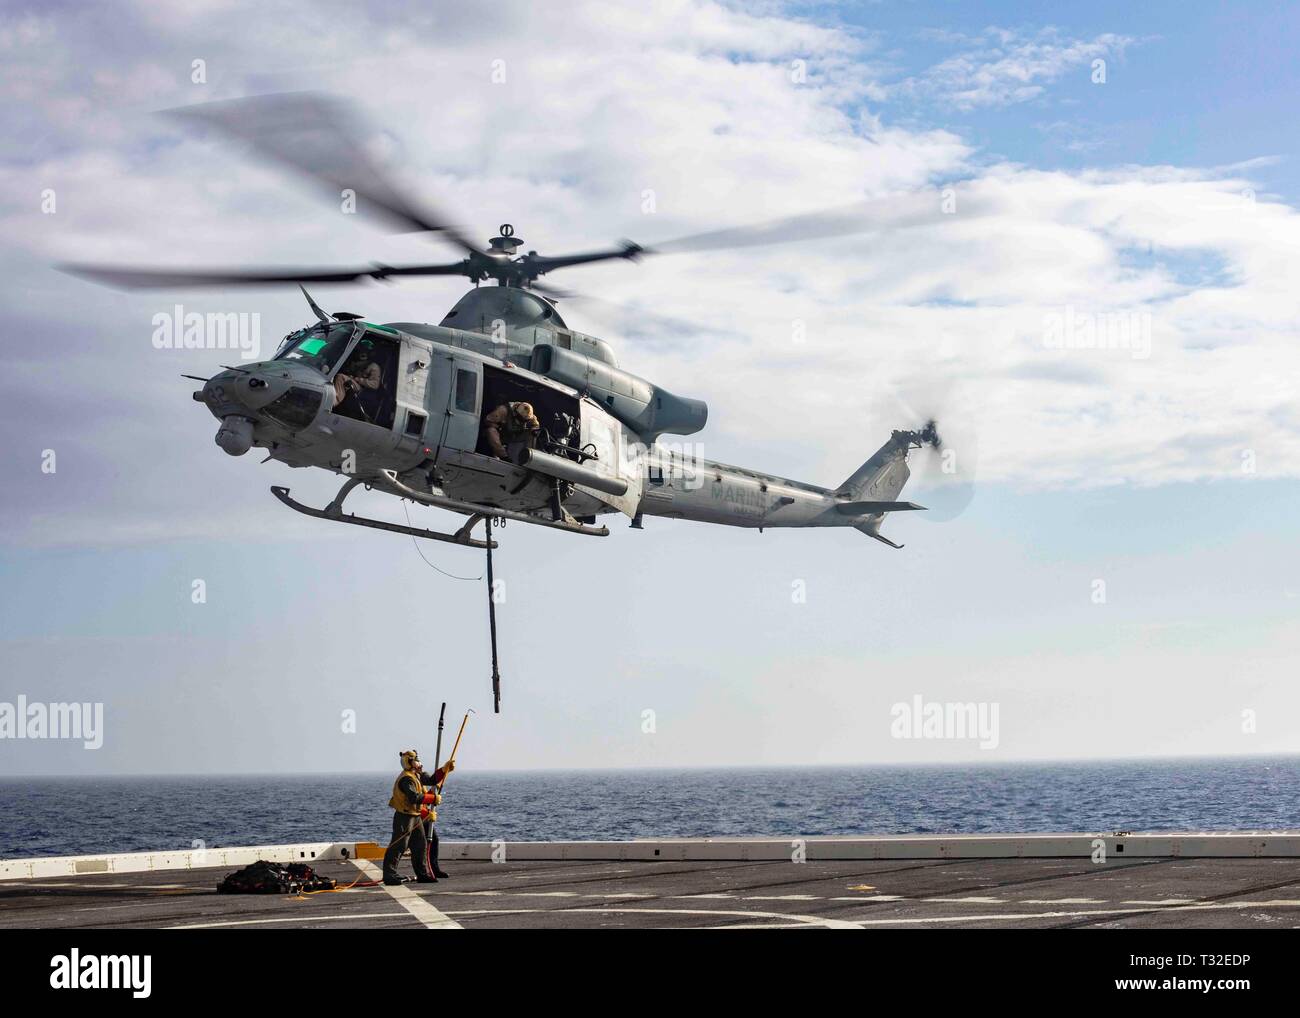 190401-N-HG389-0076 MEDITERRANEAN SEA (April 1, 2019) Sailors practice attaching pallets to a UH-1Y Huey helicopter assigned to the “Black Knights” of Marine Medium Tiltrotor Squadron (VMM) 264 (Reinforced) aboard the San Antonio-class amphibious transport dock ship USS Arlington (LPD 24), April 1, 2019. Arlington is on a scheduled deployment as part of the Kearsarge Amphibious Ready Group in support of maritime security operations, crisis response and theater security cooperation, while also providing a forward naval presence. (U.S. Navy photo by Mass Communication Specialist 2nd Class Brando Stock Photo